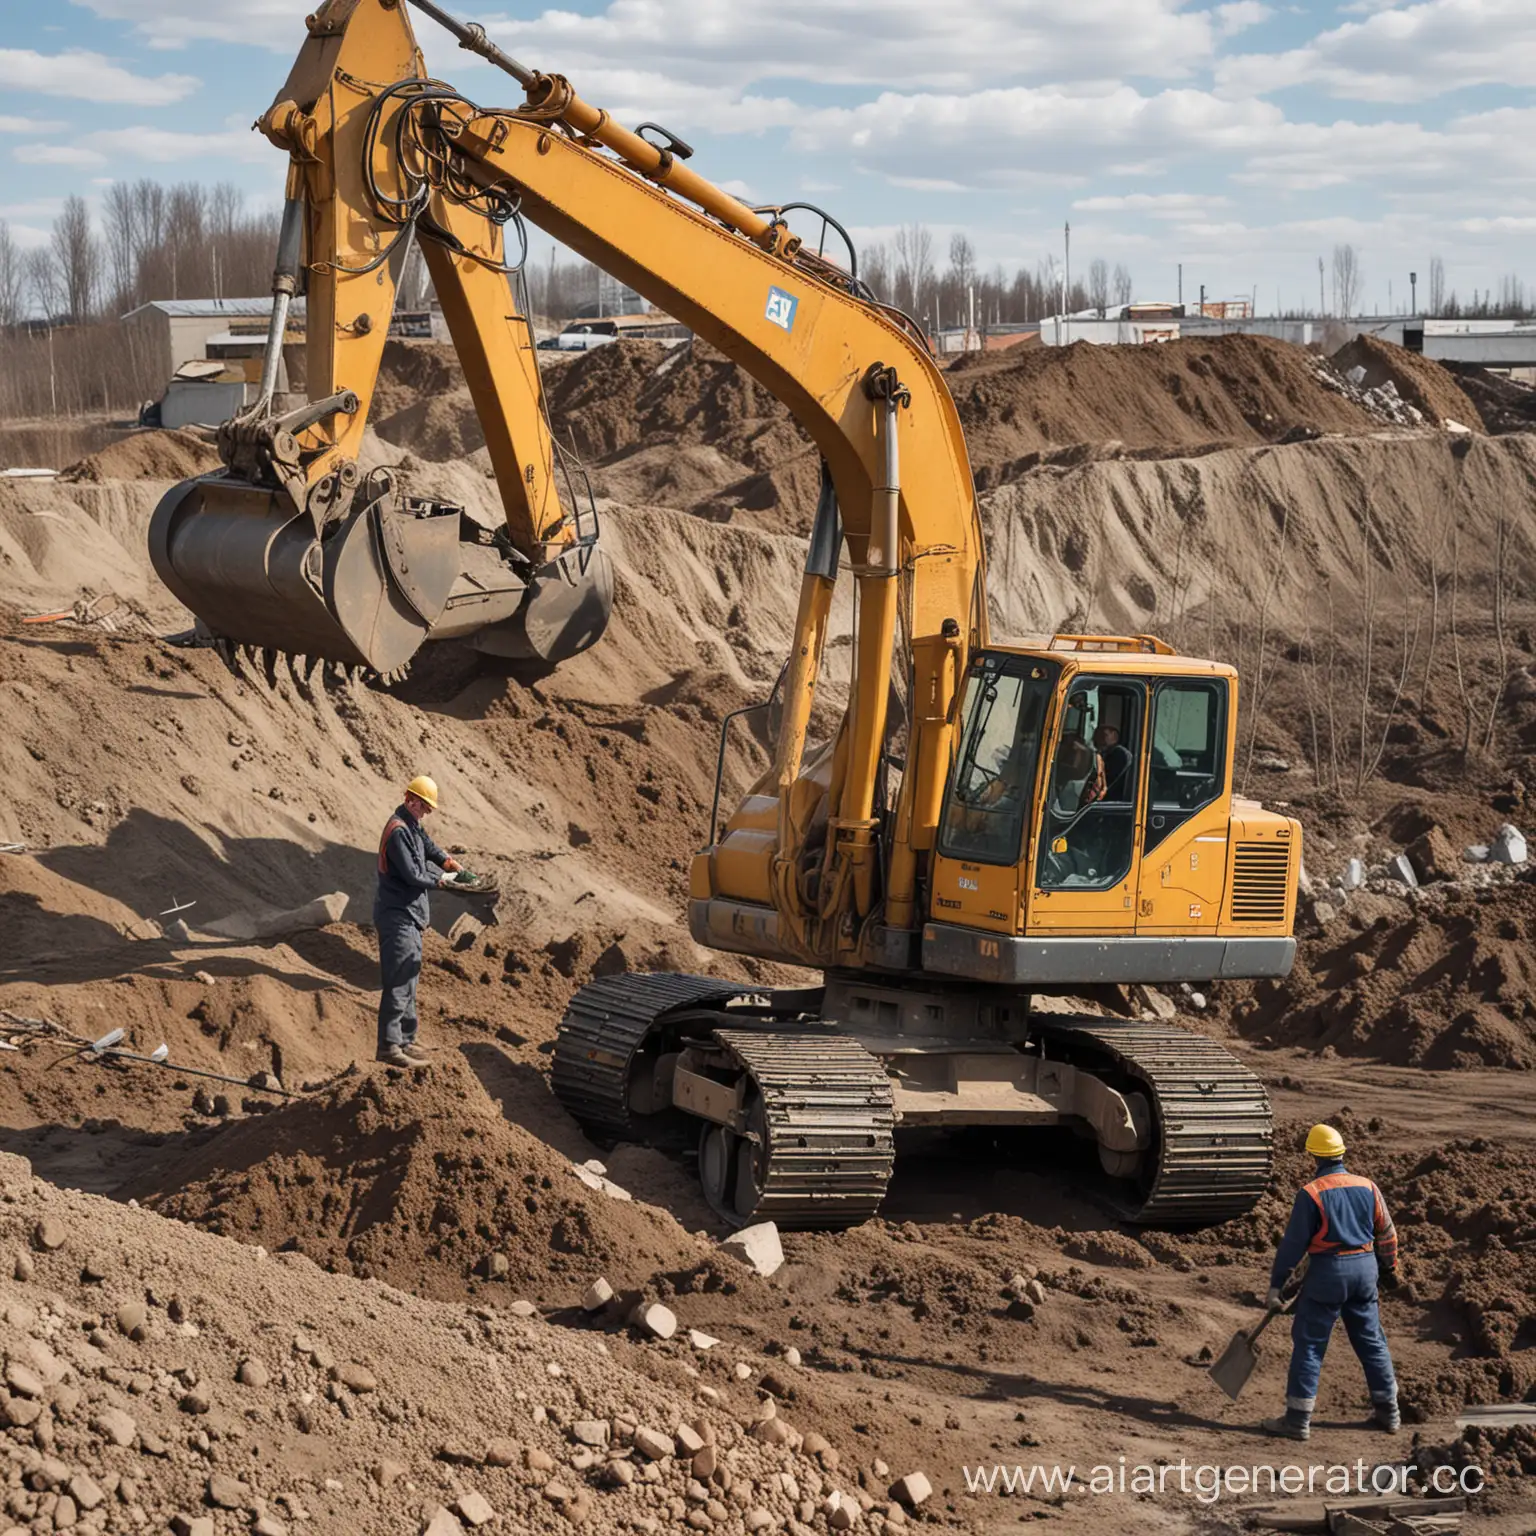 Russian-Excavator-Workers-in-Action-Real-Color-Photo-of-Dismantling-Works